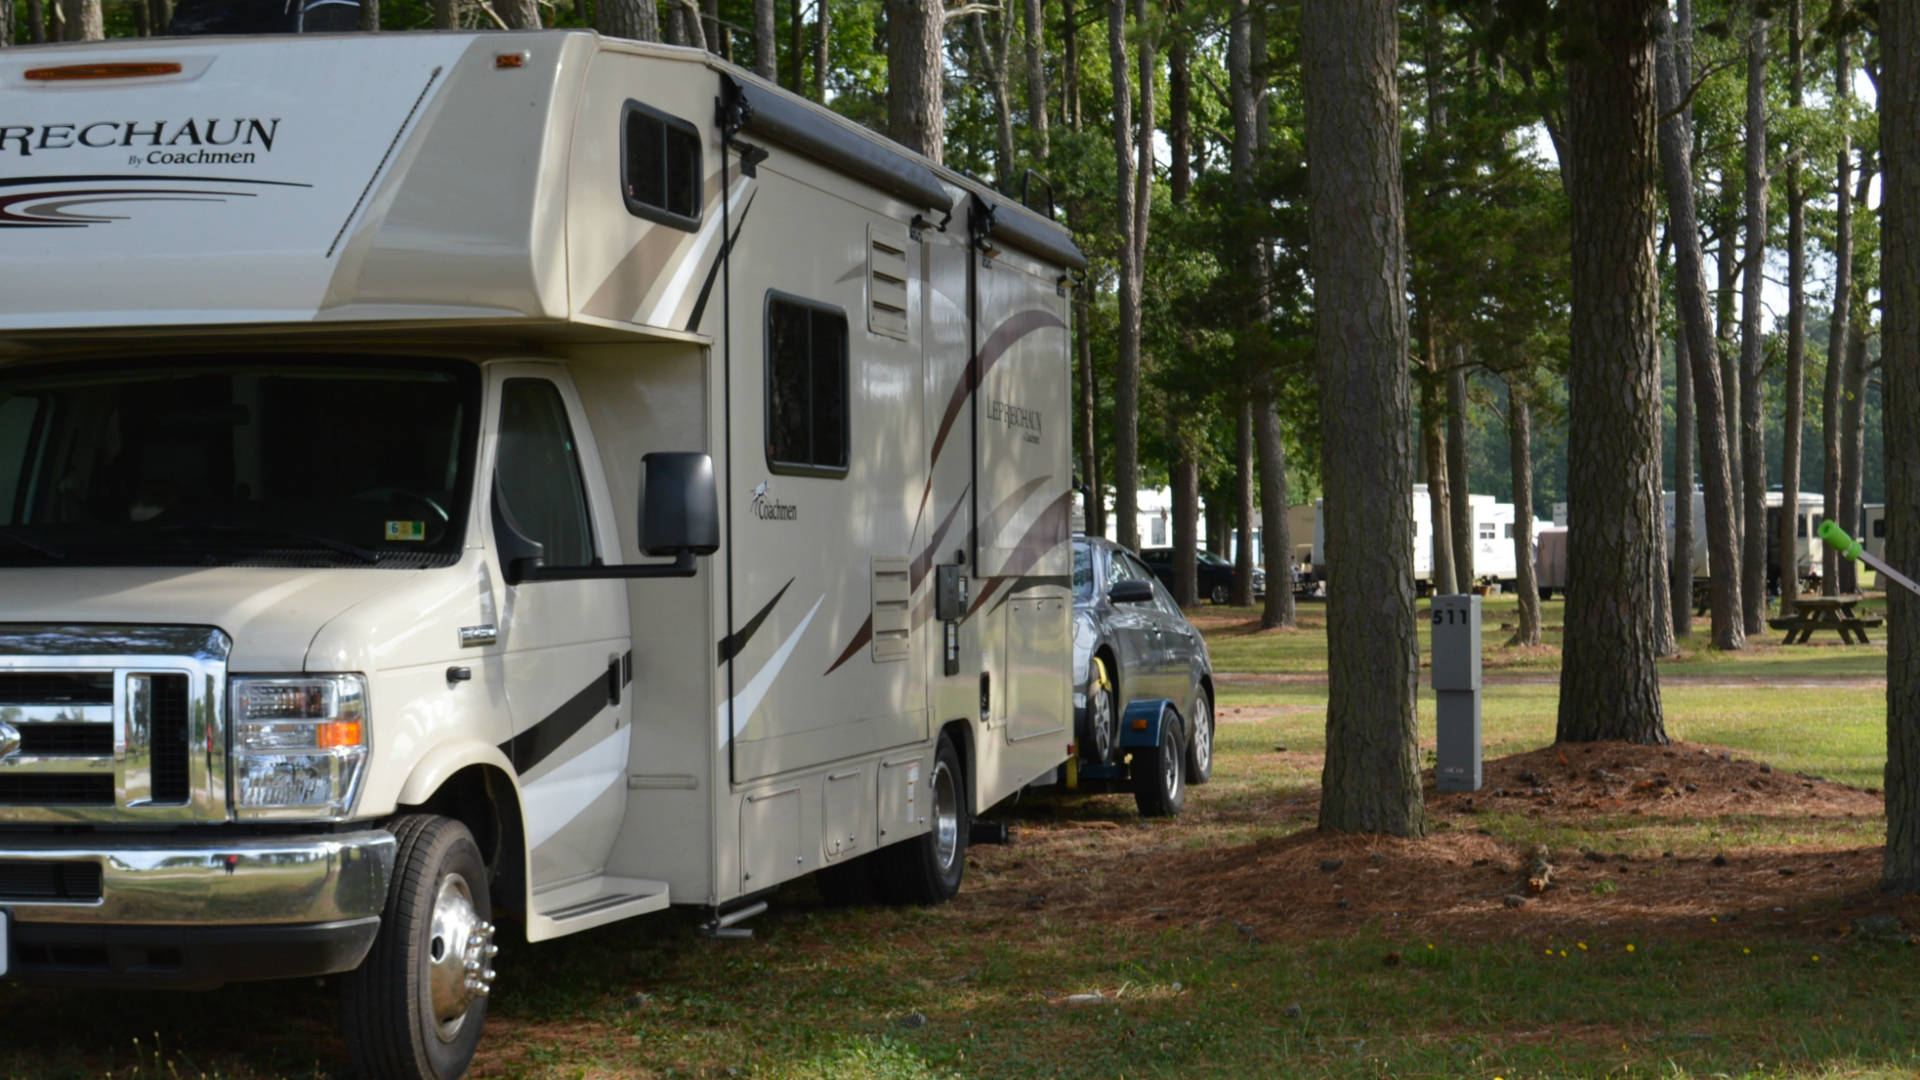 Three Ways to Tow a Car Behind Your RV